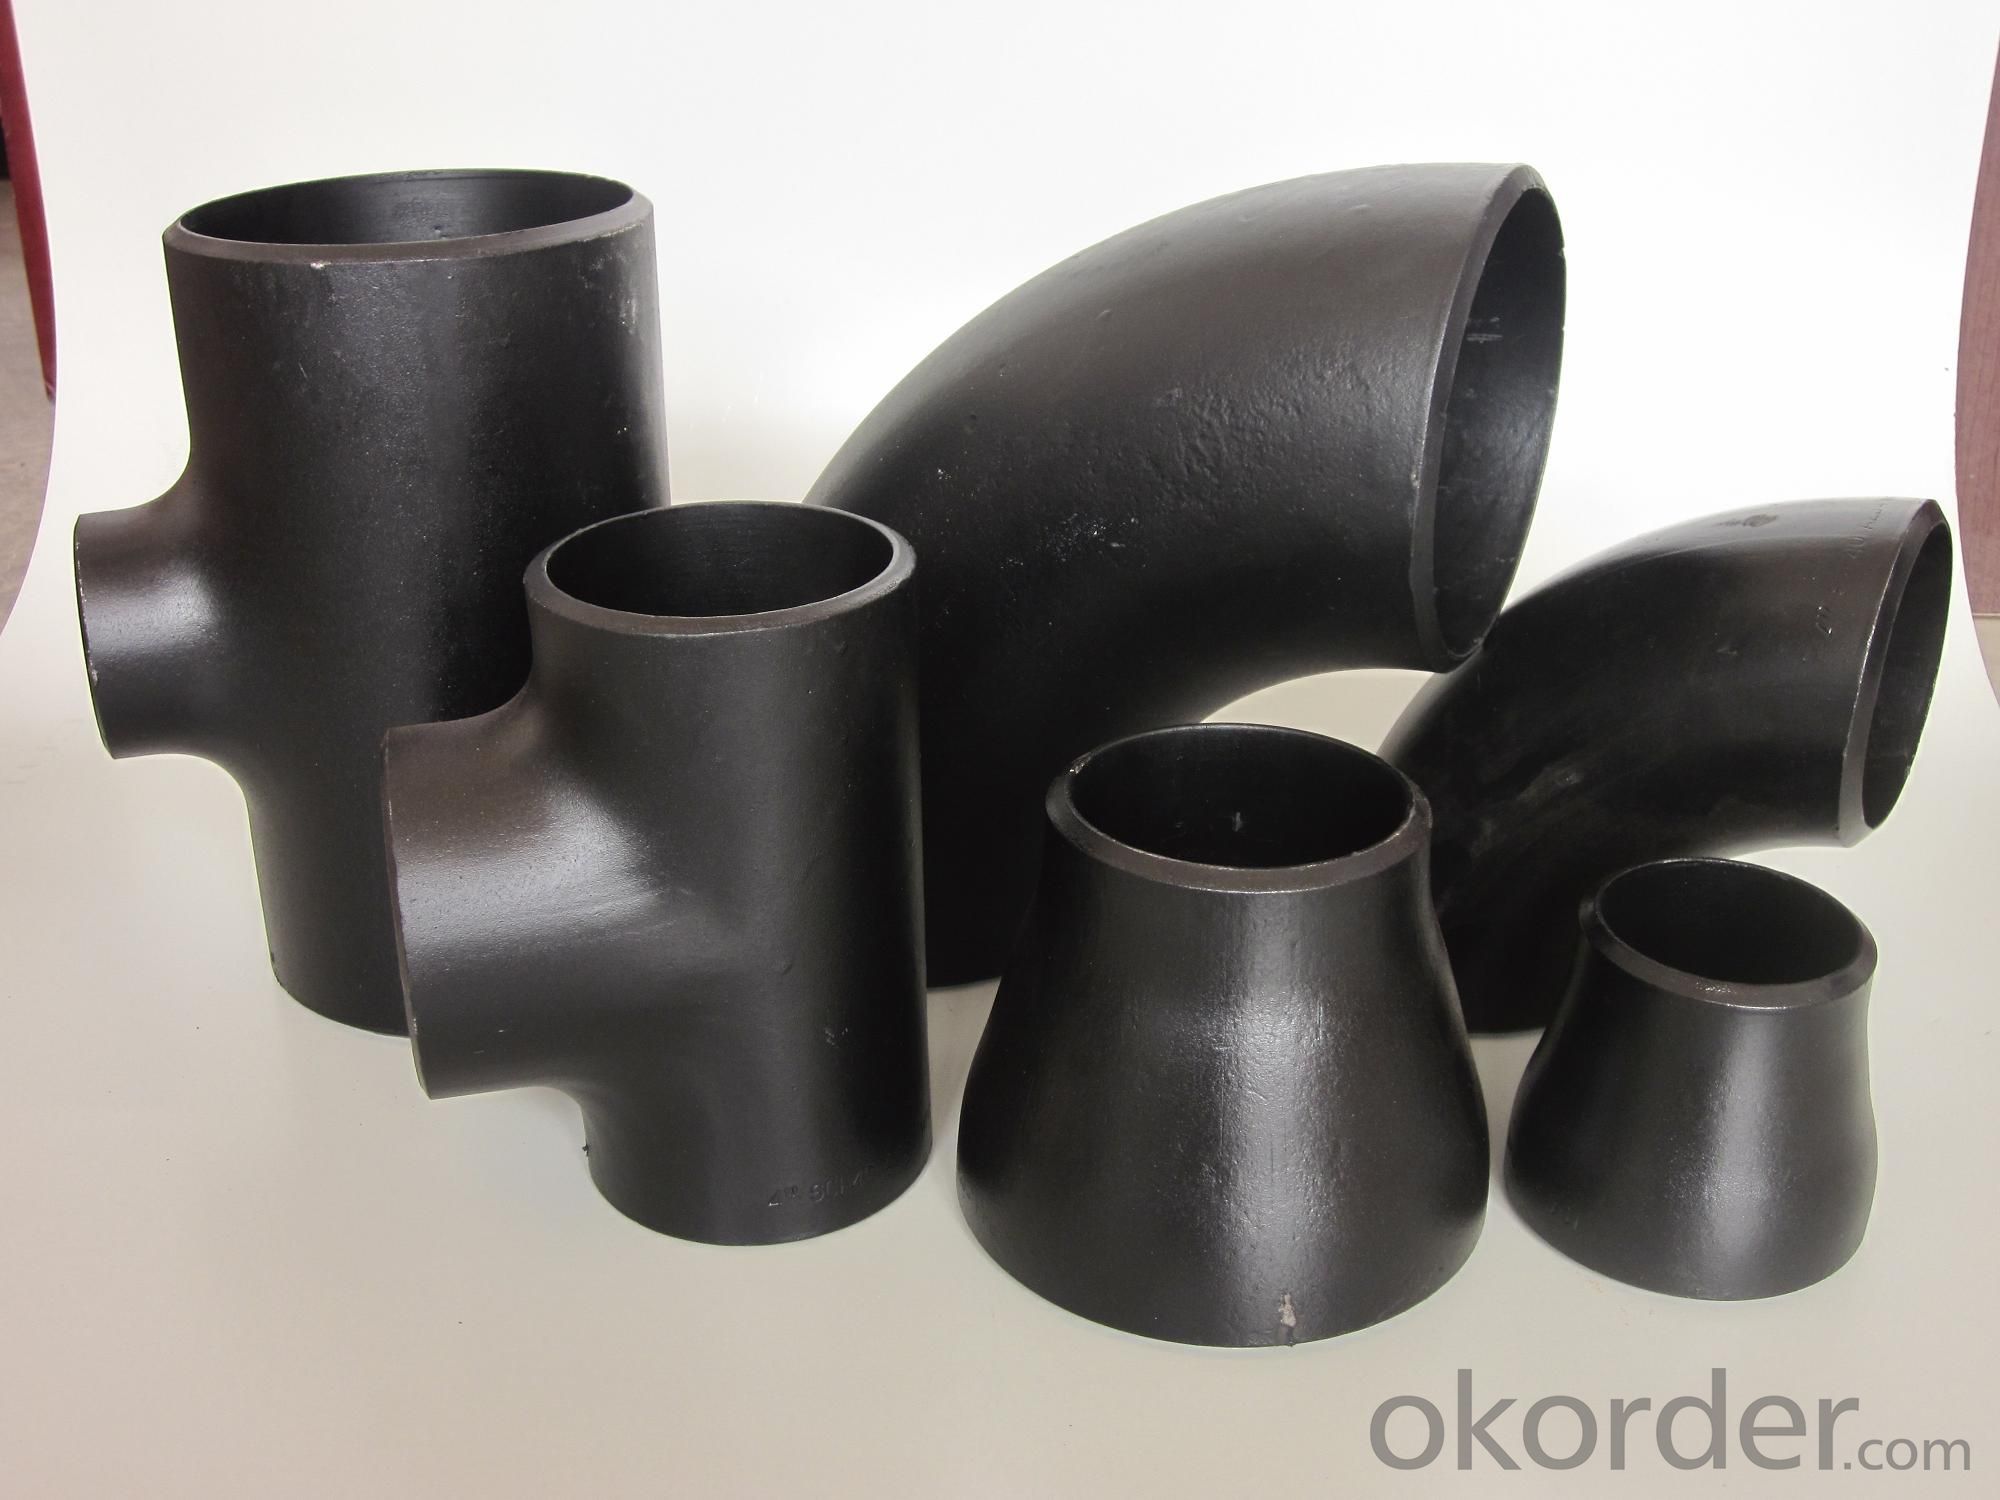 CARBON STEEL PIPE FITTINGS ASTM A234 TEE 1''-12''